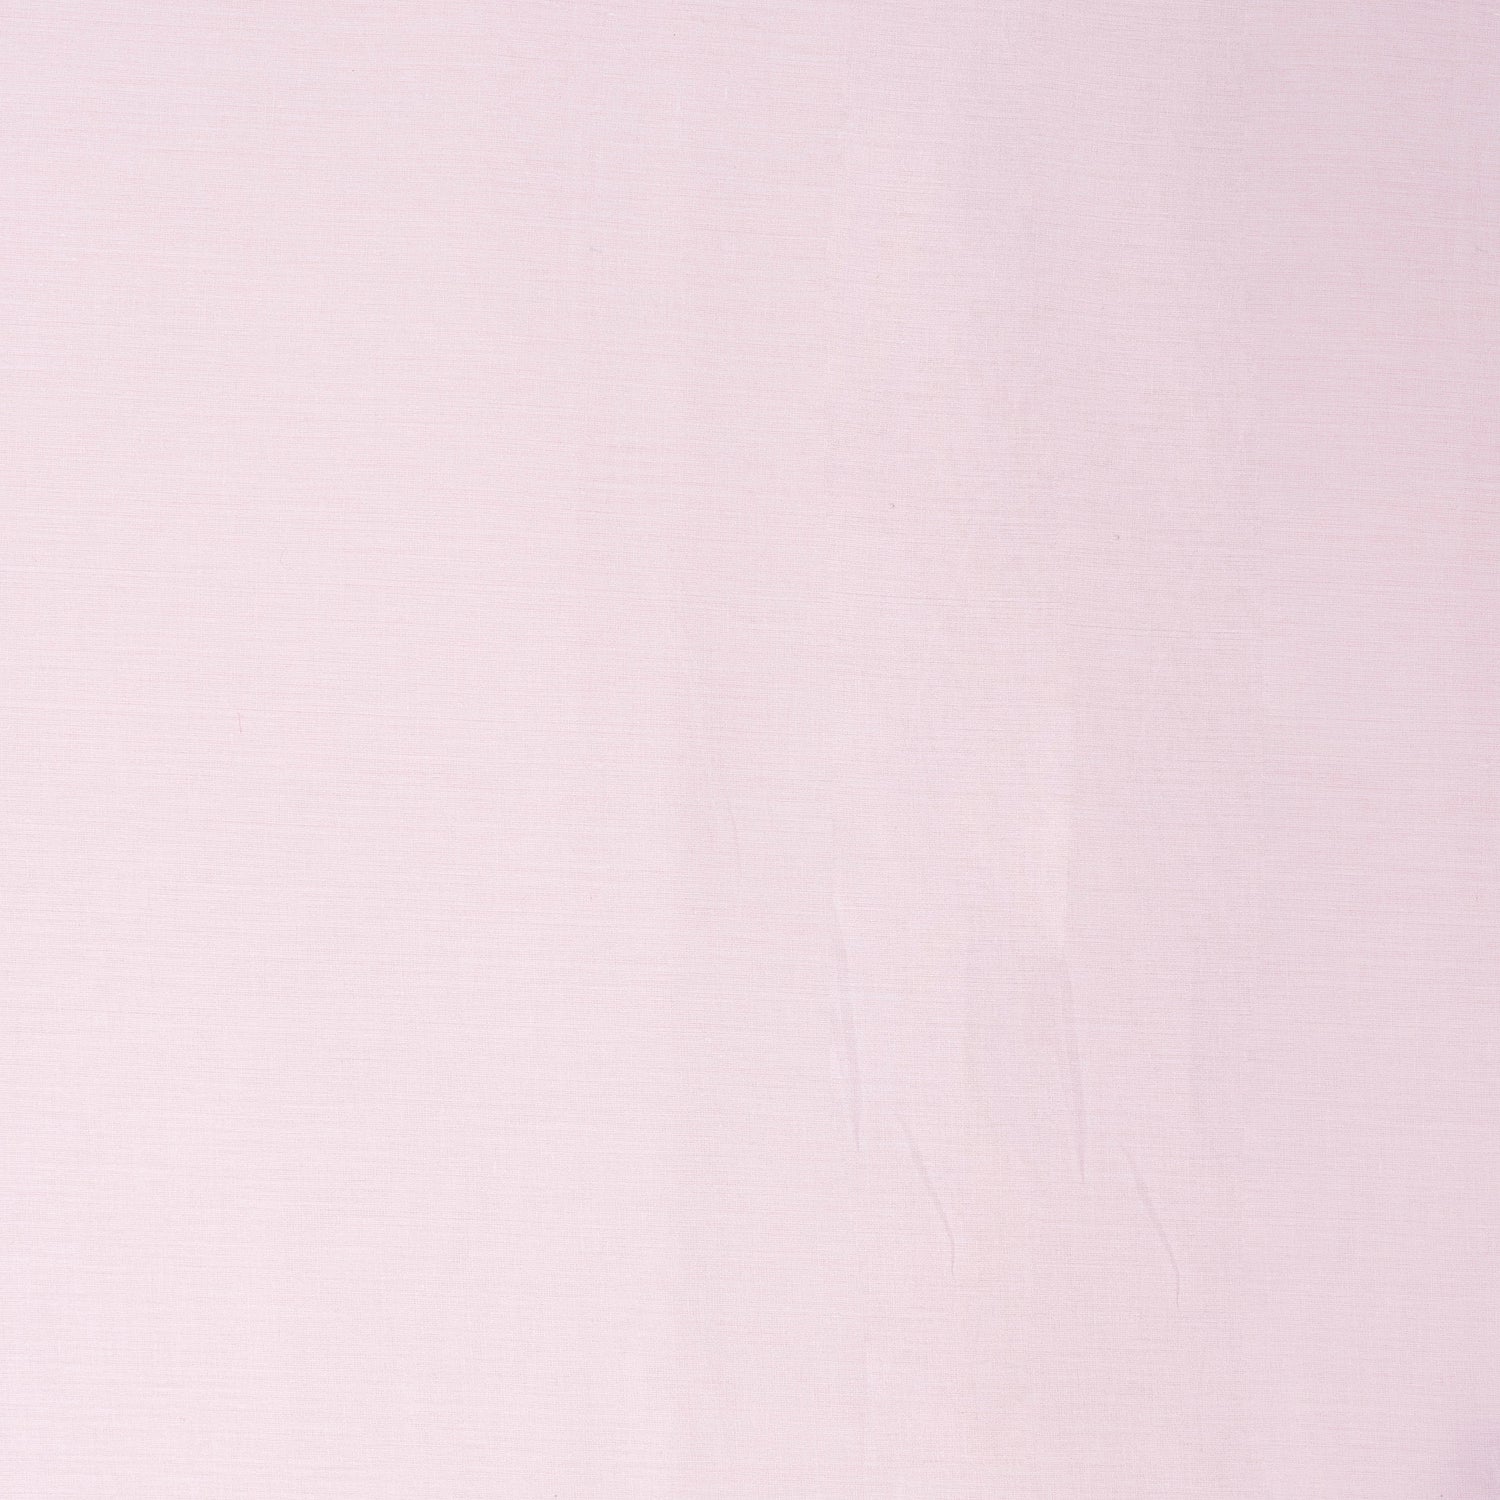 Solid White Pink Cotton Plain Fabric